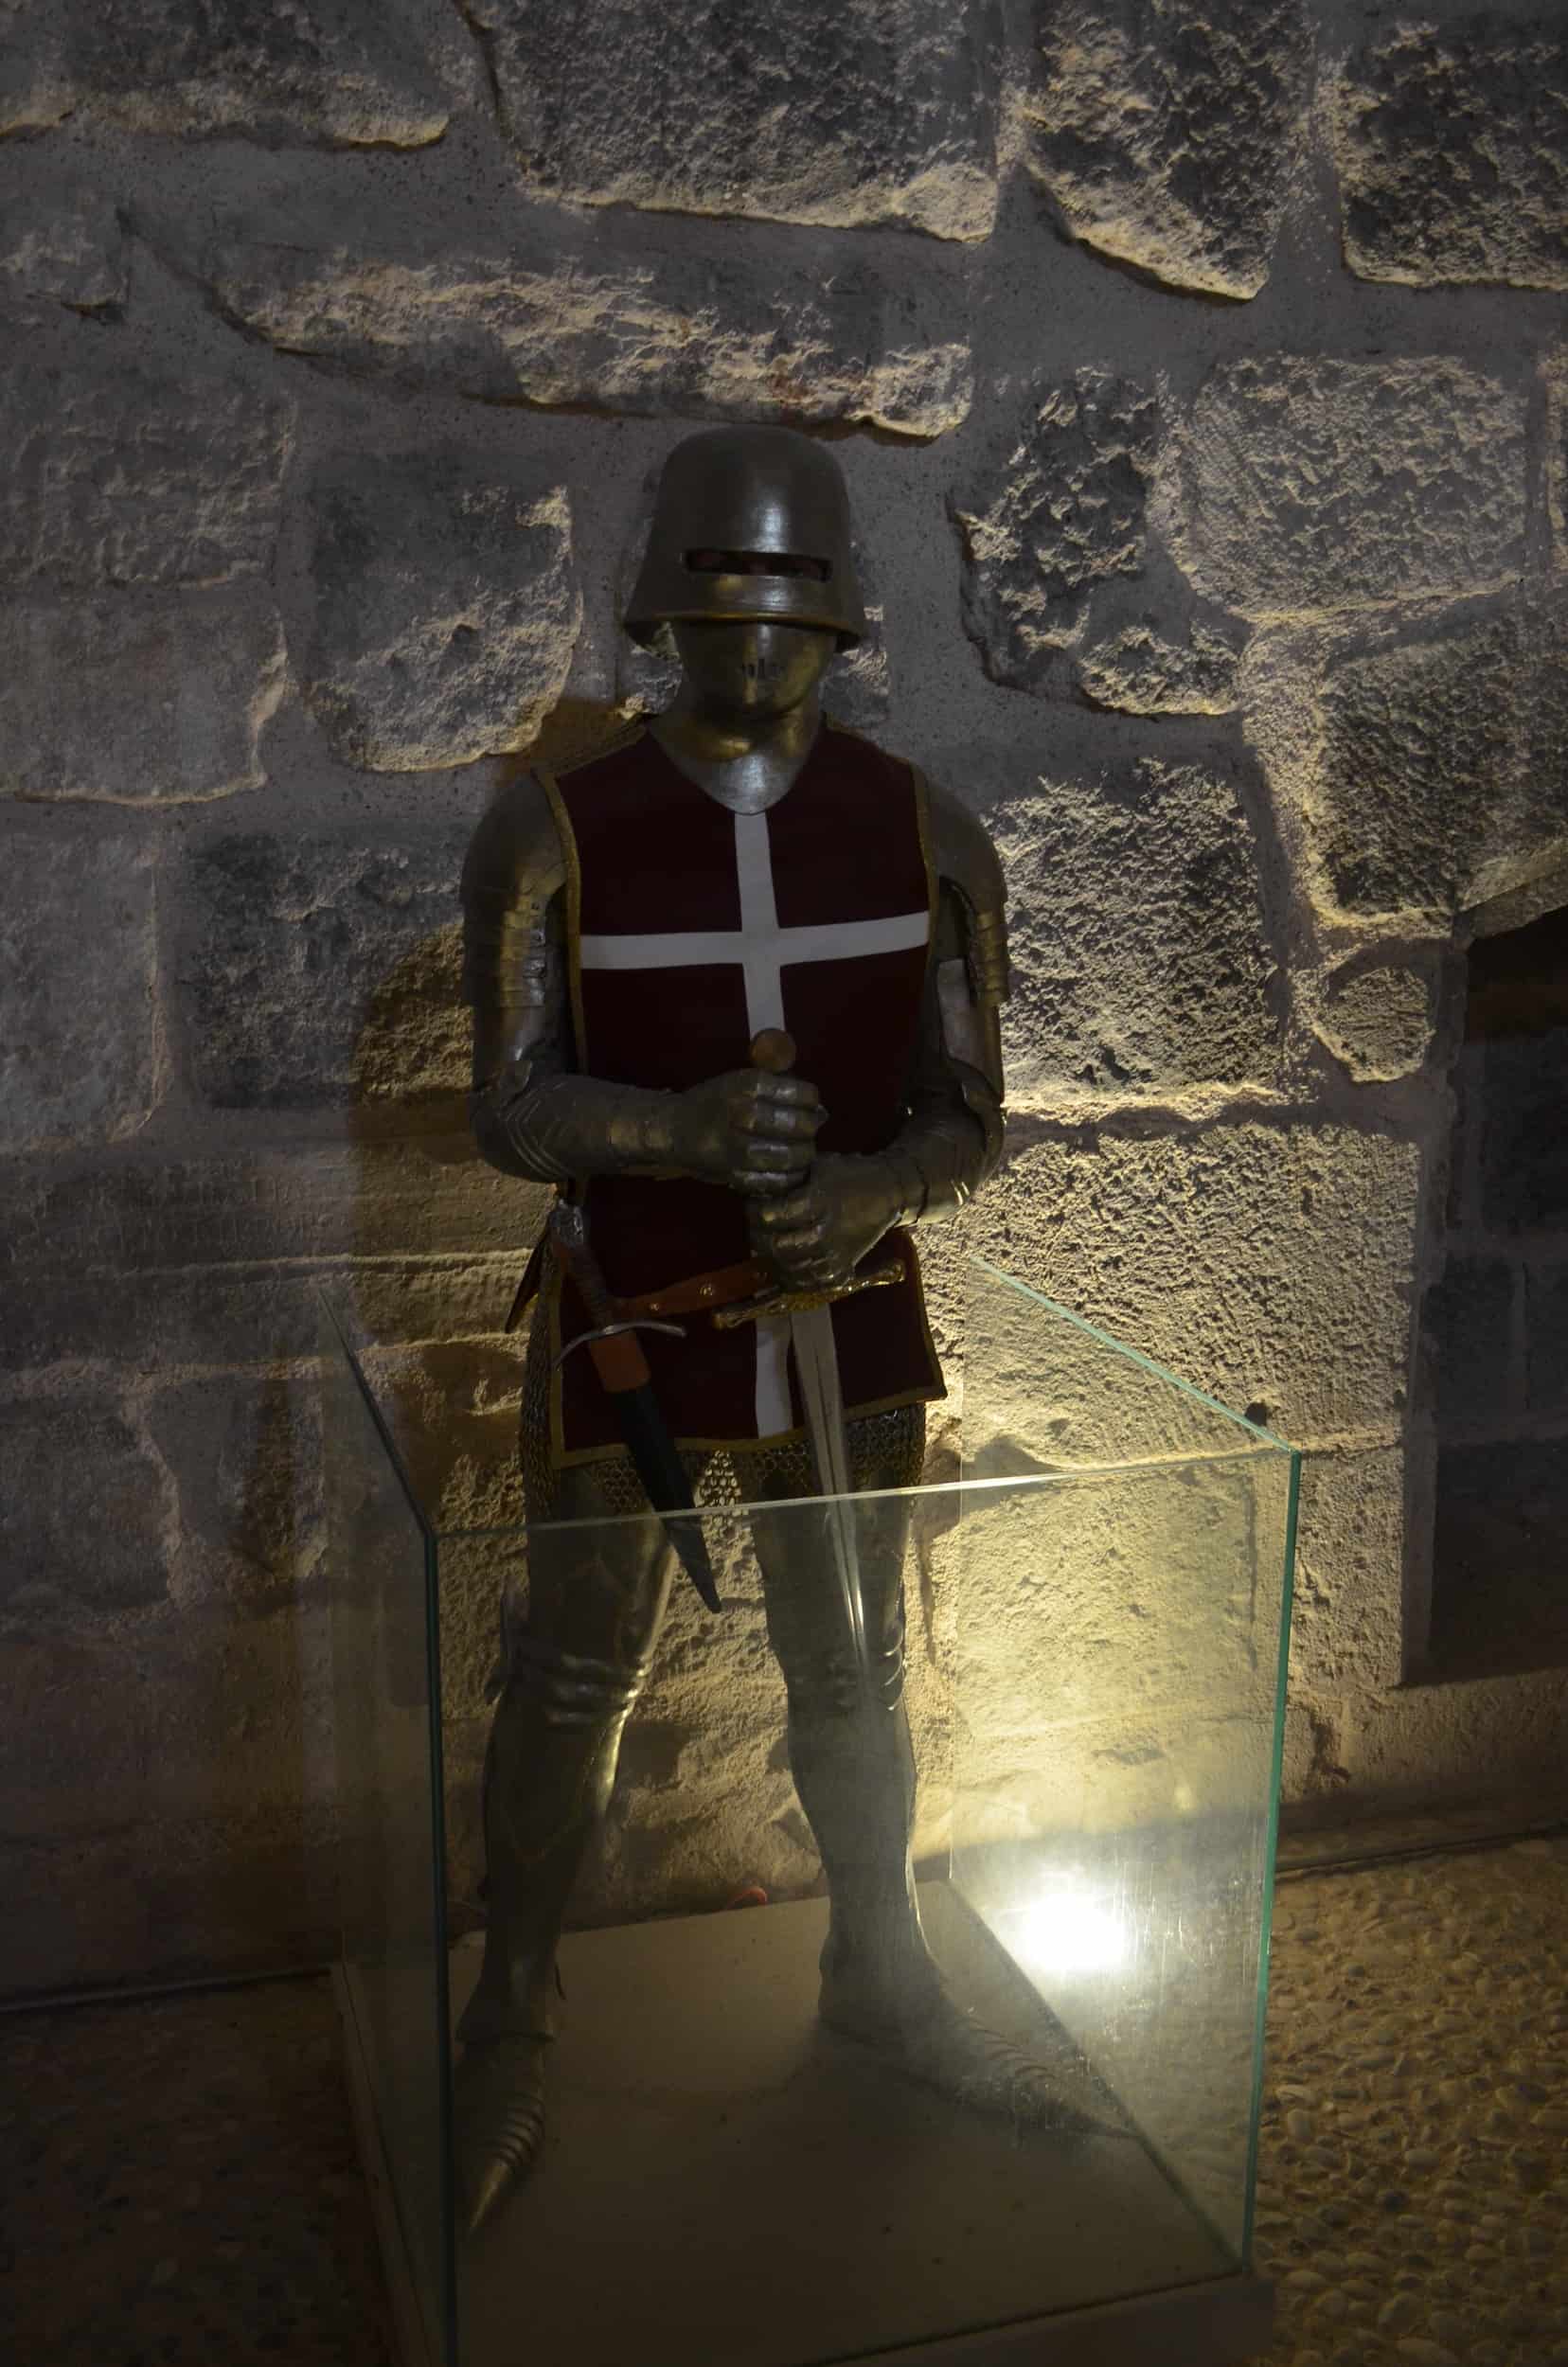 Suit of armor in the English Tower